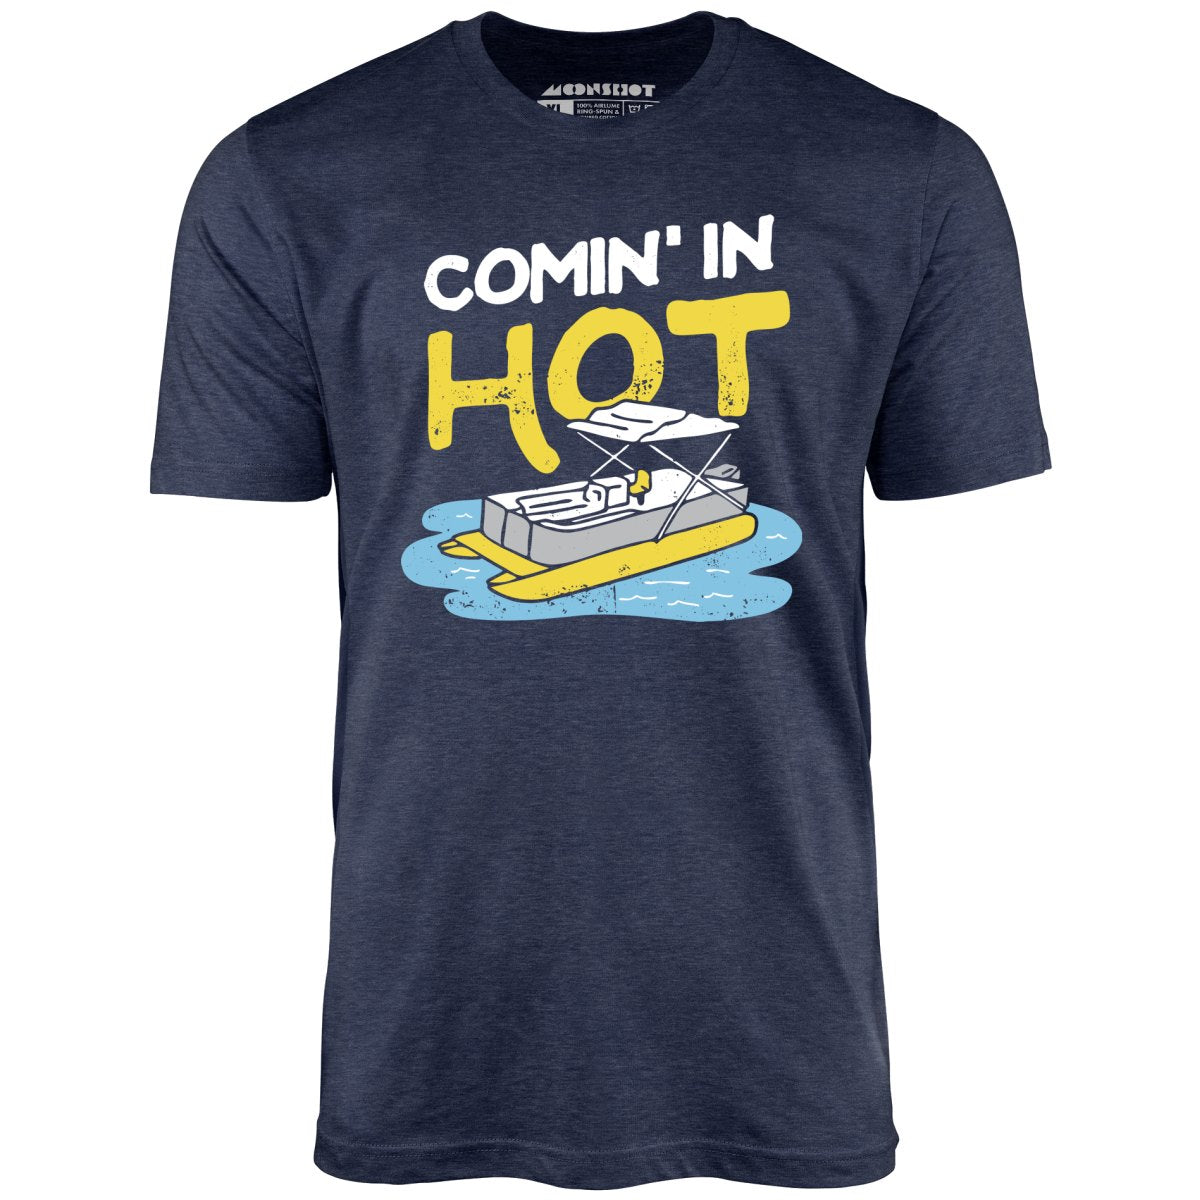 Comin' in Hot - Unisex T-Shirt